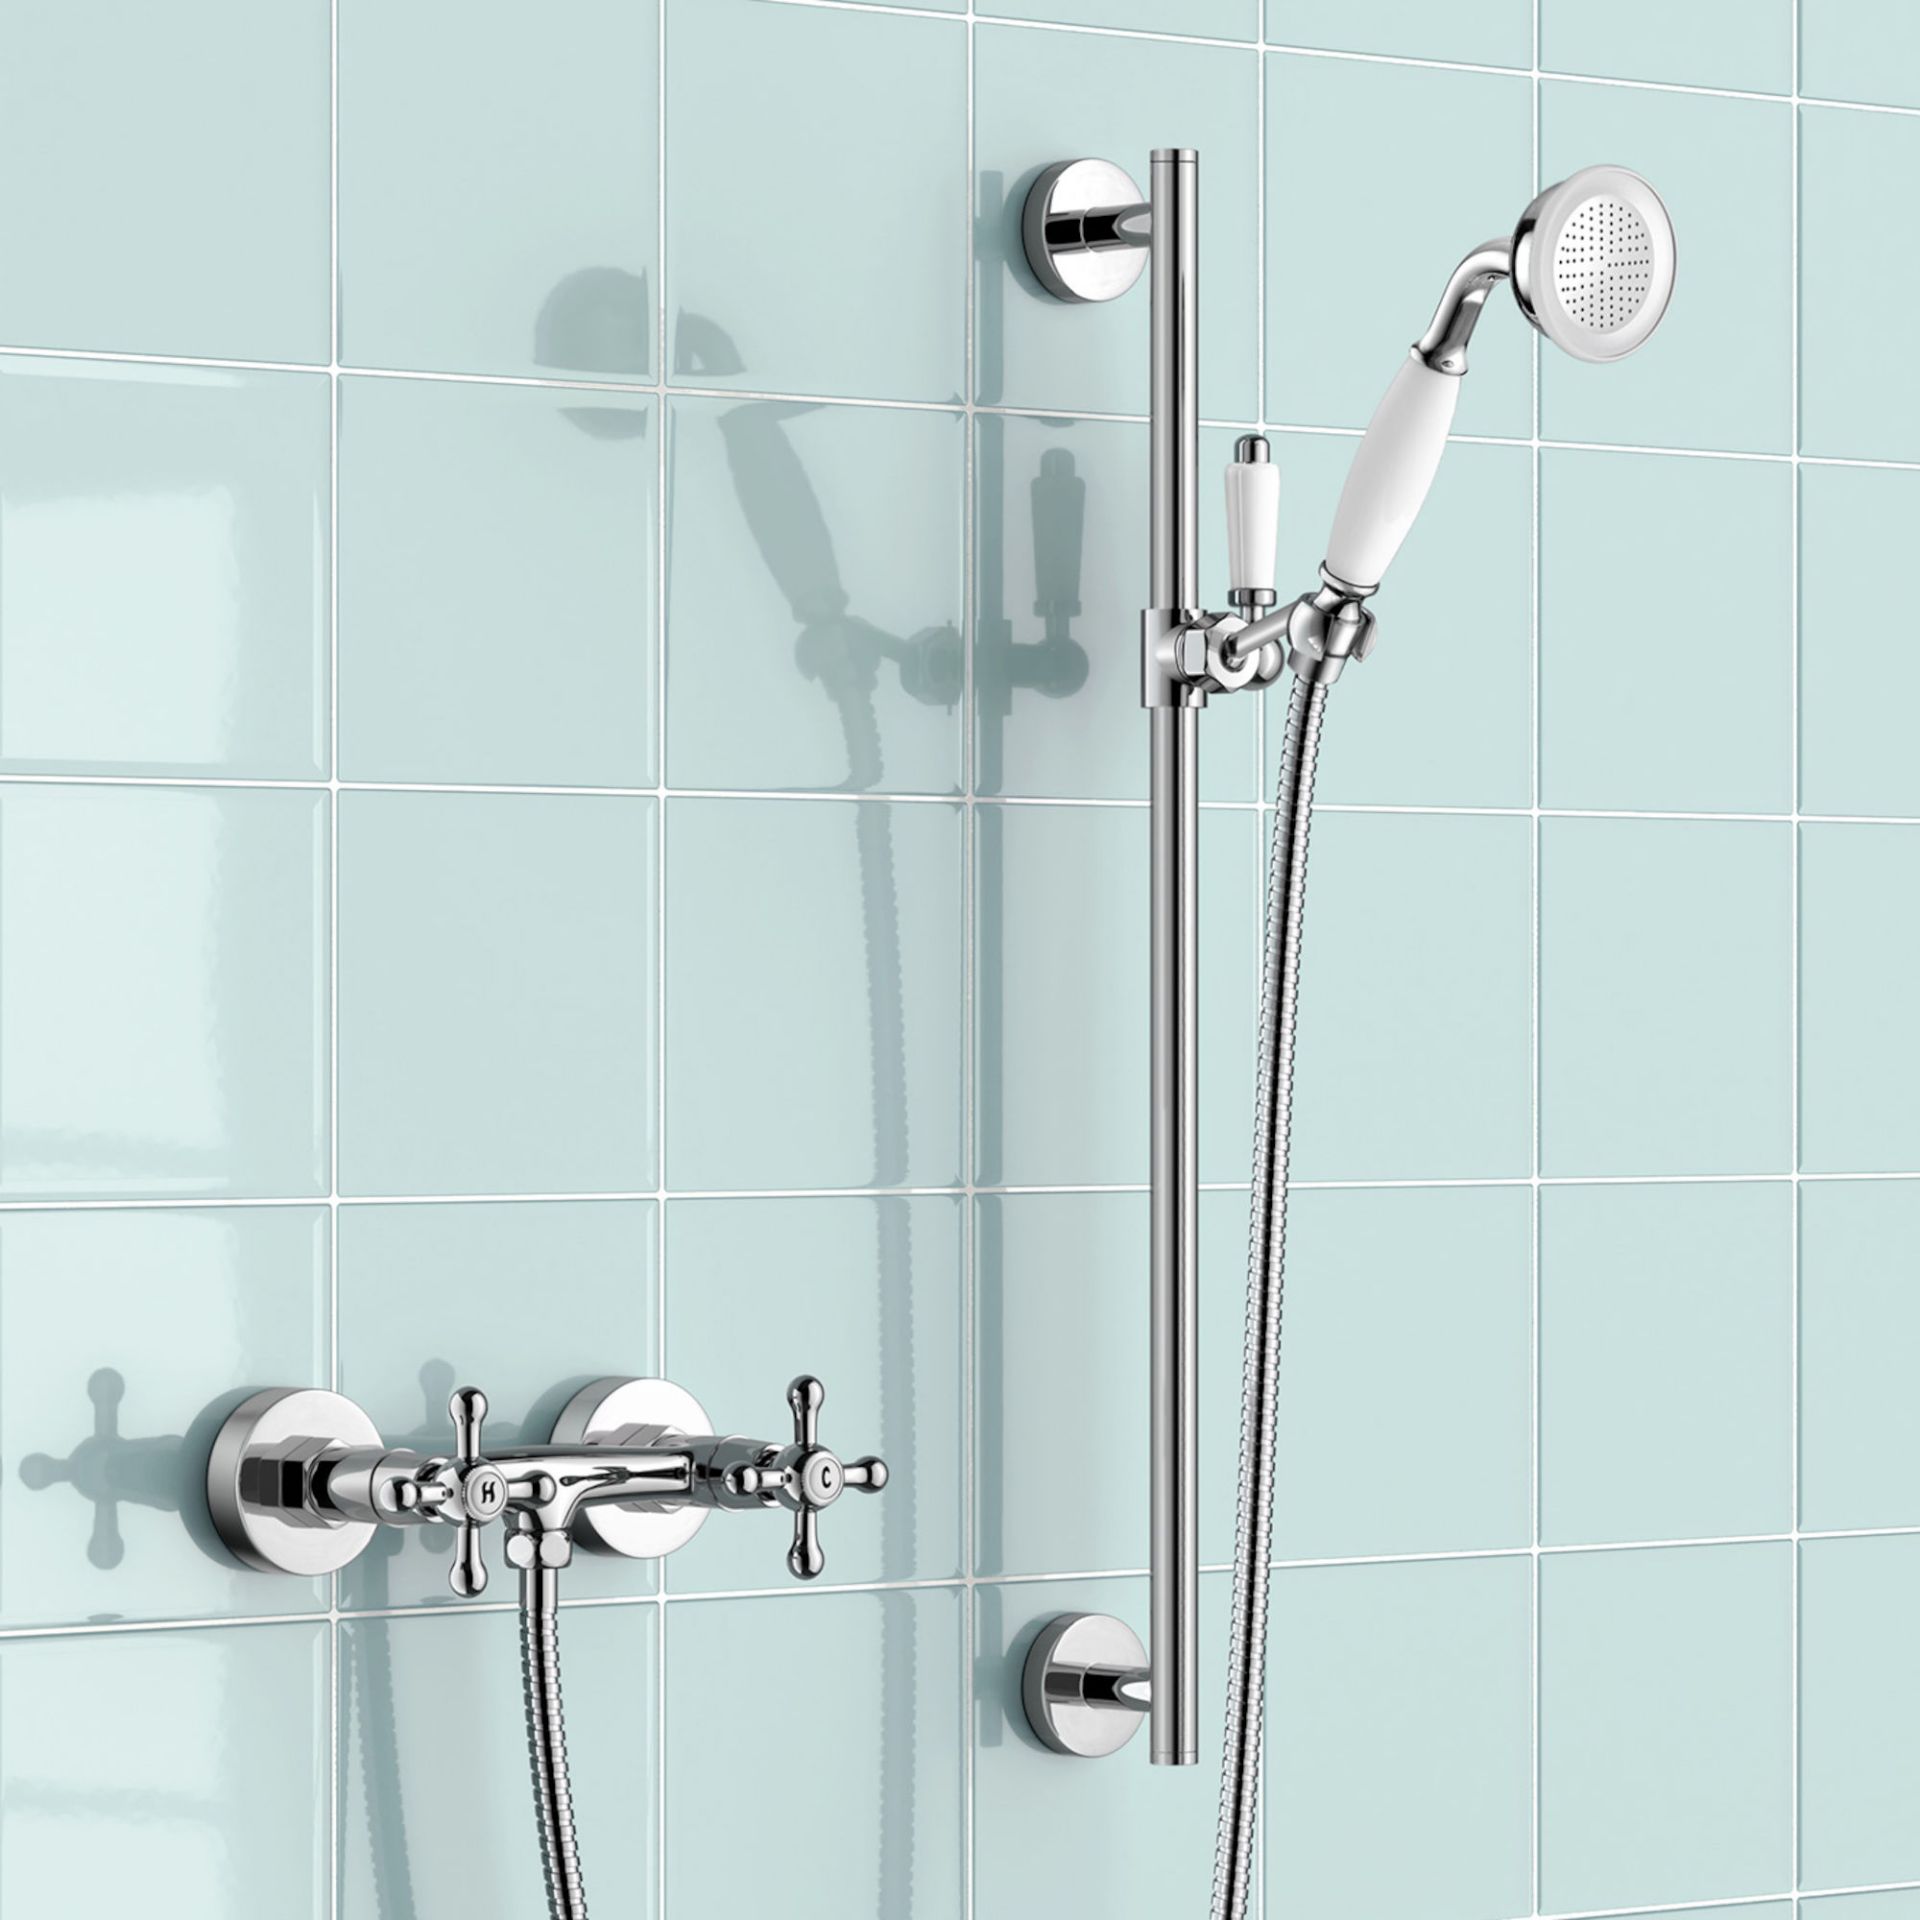 (CT226) Traditional Exposed Bar Mixer Kit Exposed design makes for a statement piece Traditional